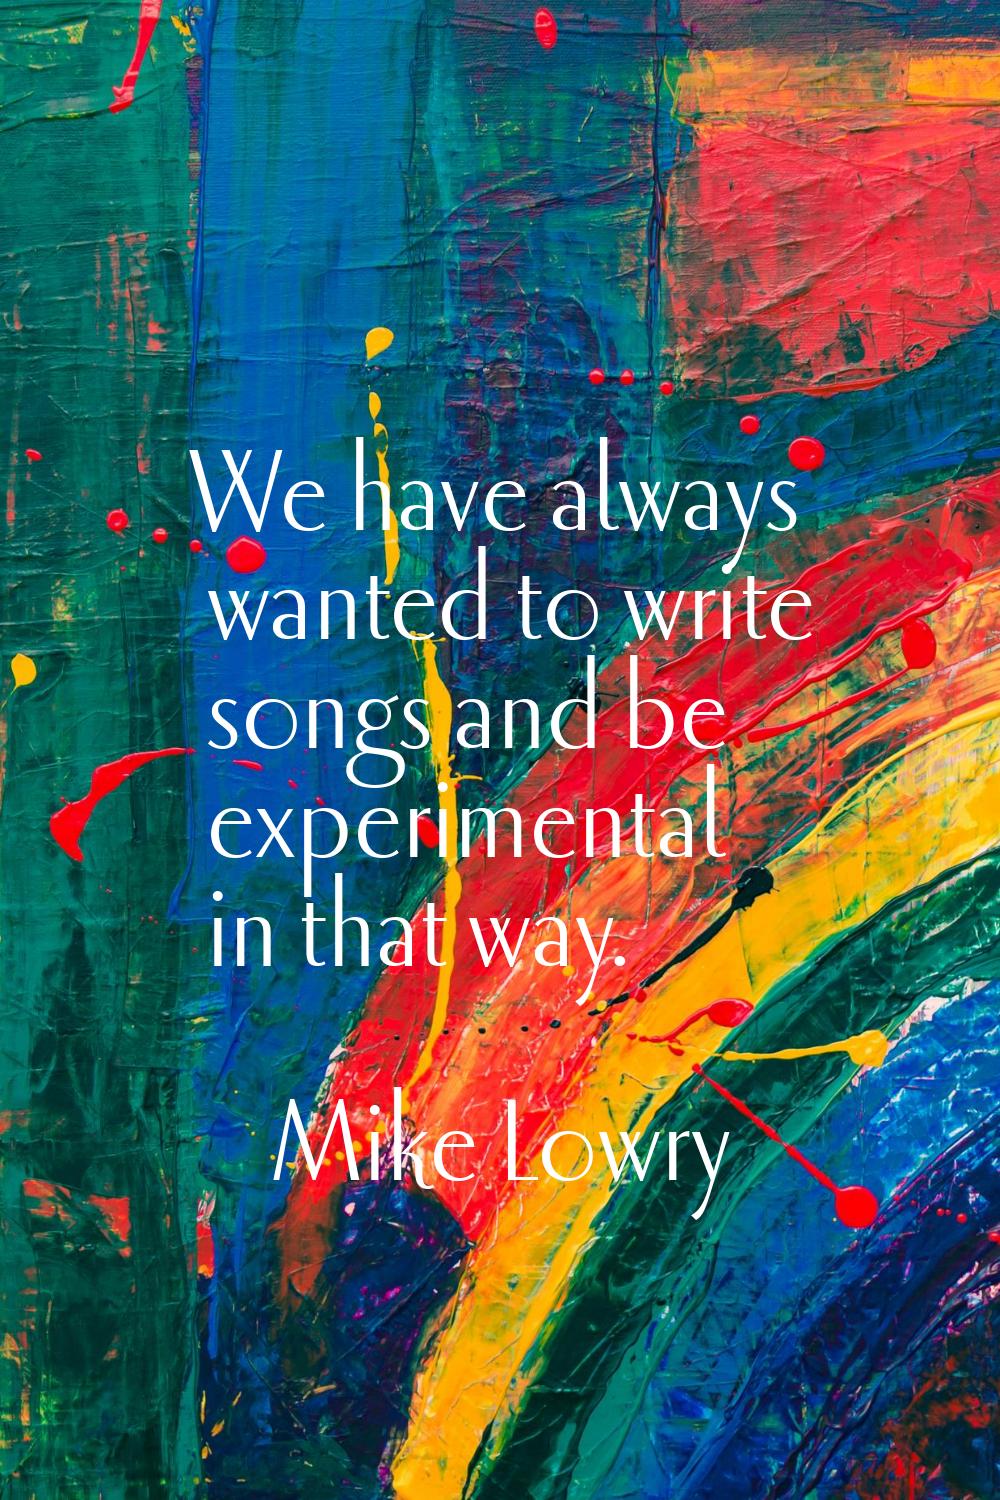 We have always wanted to write songs and be experimental in that way.